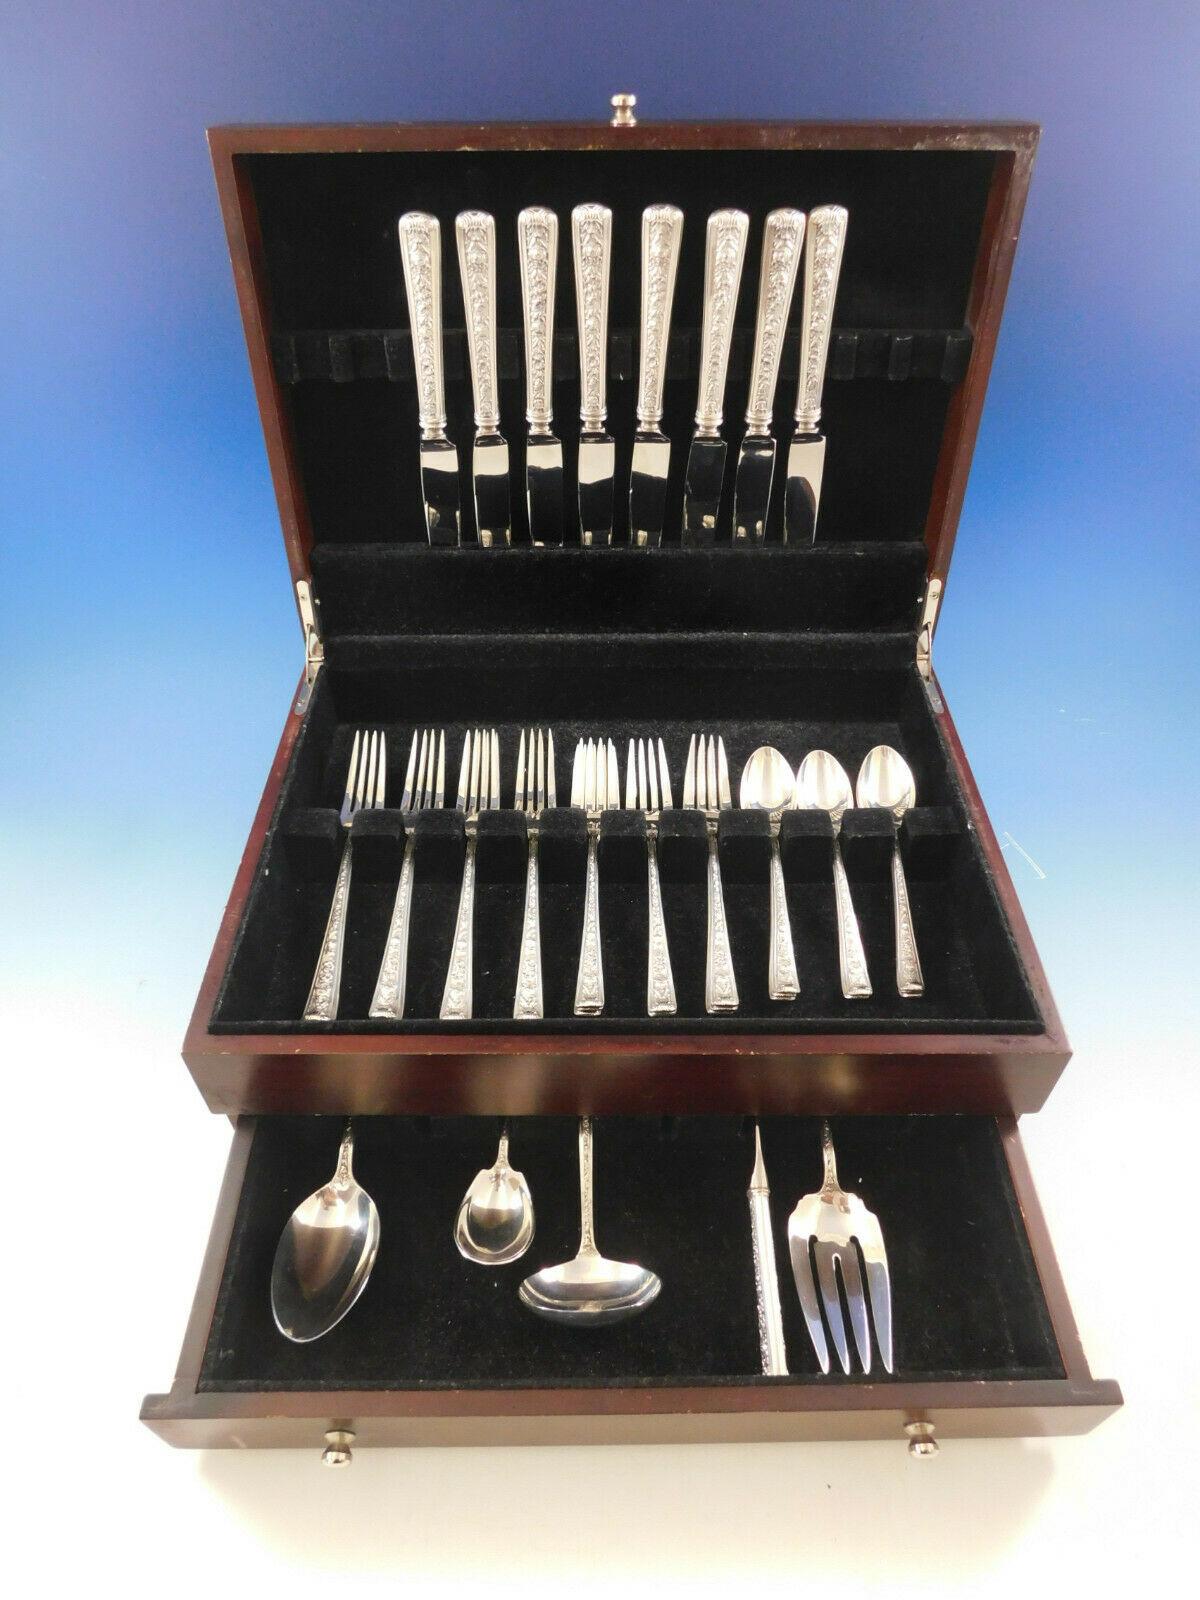 Windsor Rose by Watson circa 1940s sterling silver flatware set, 37 pieces. This set includes:

8 knives, 9 1/8